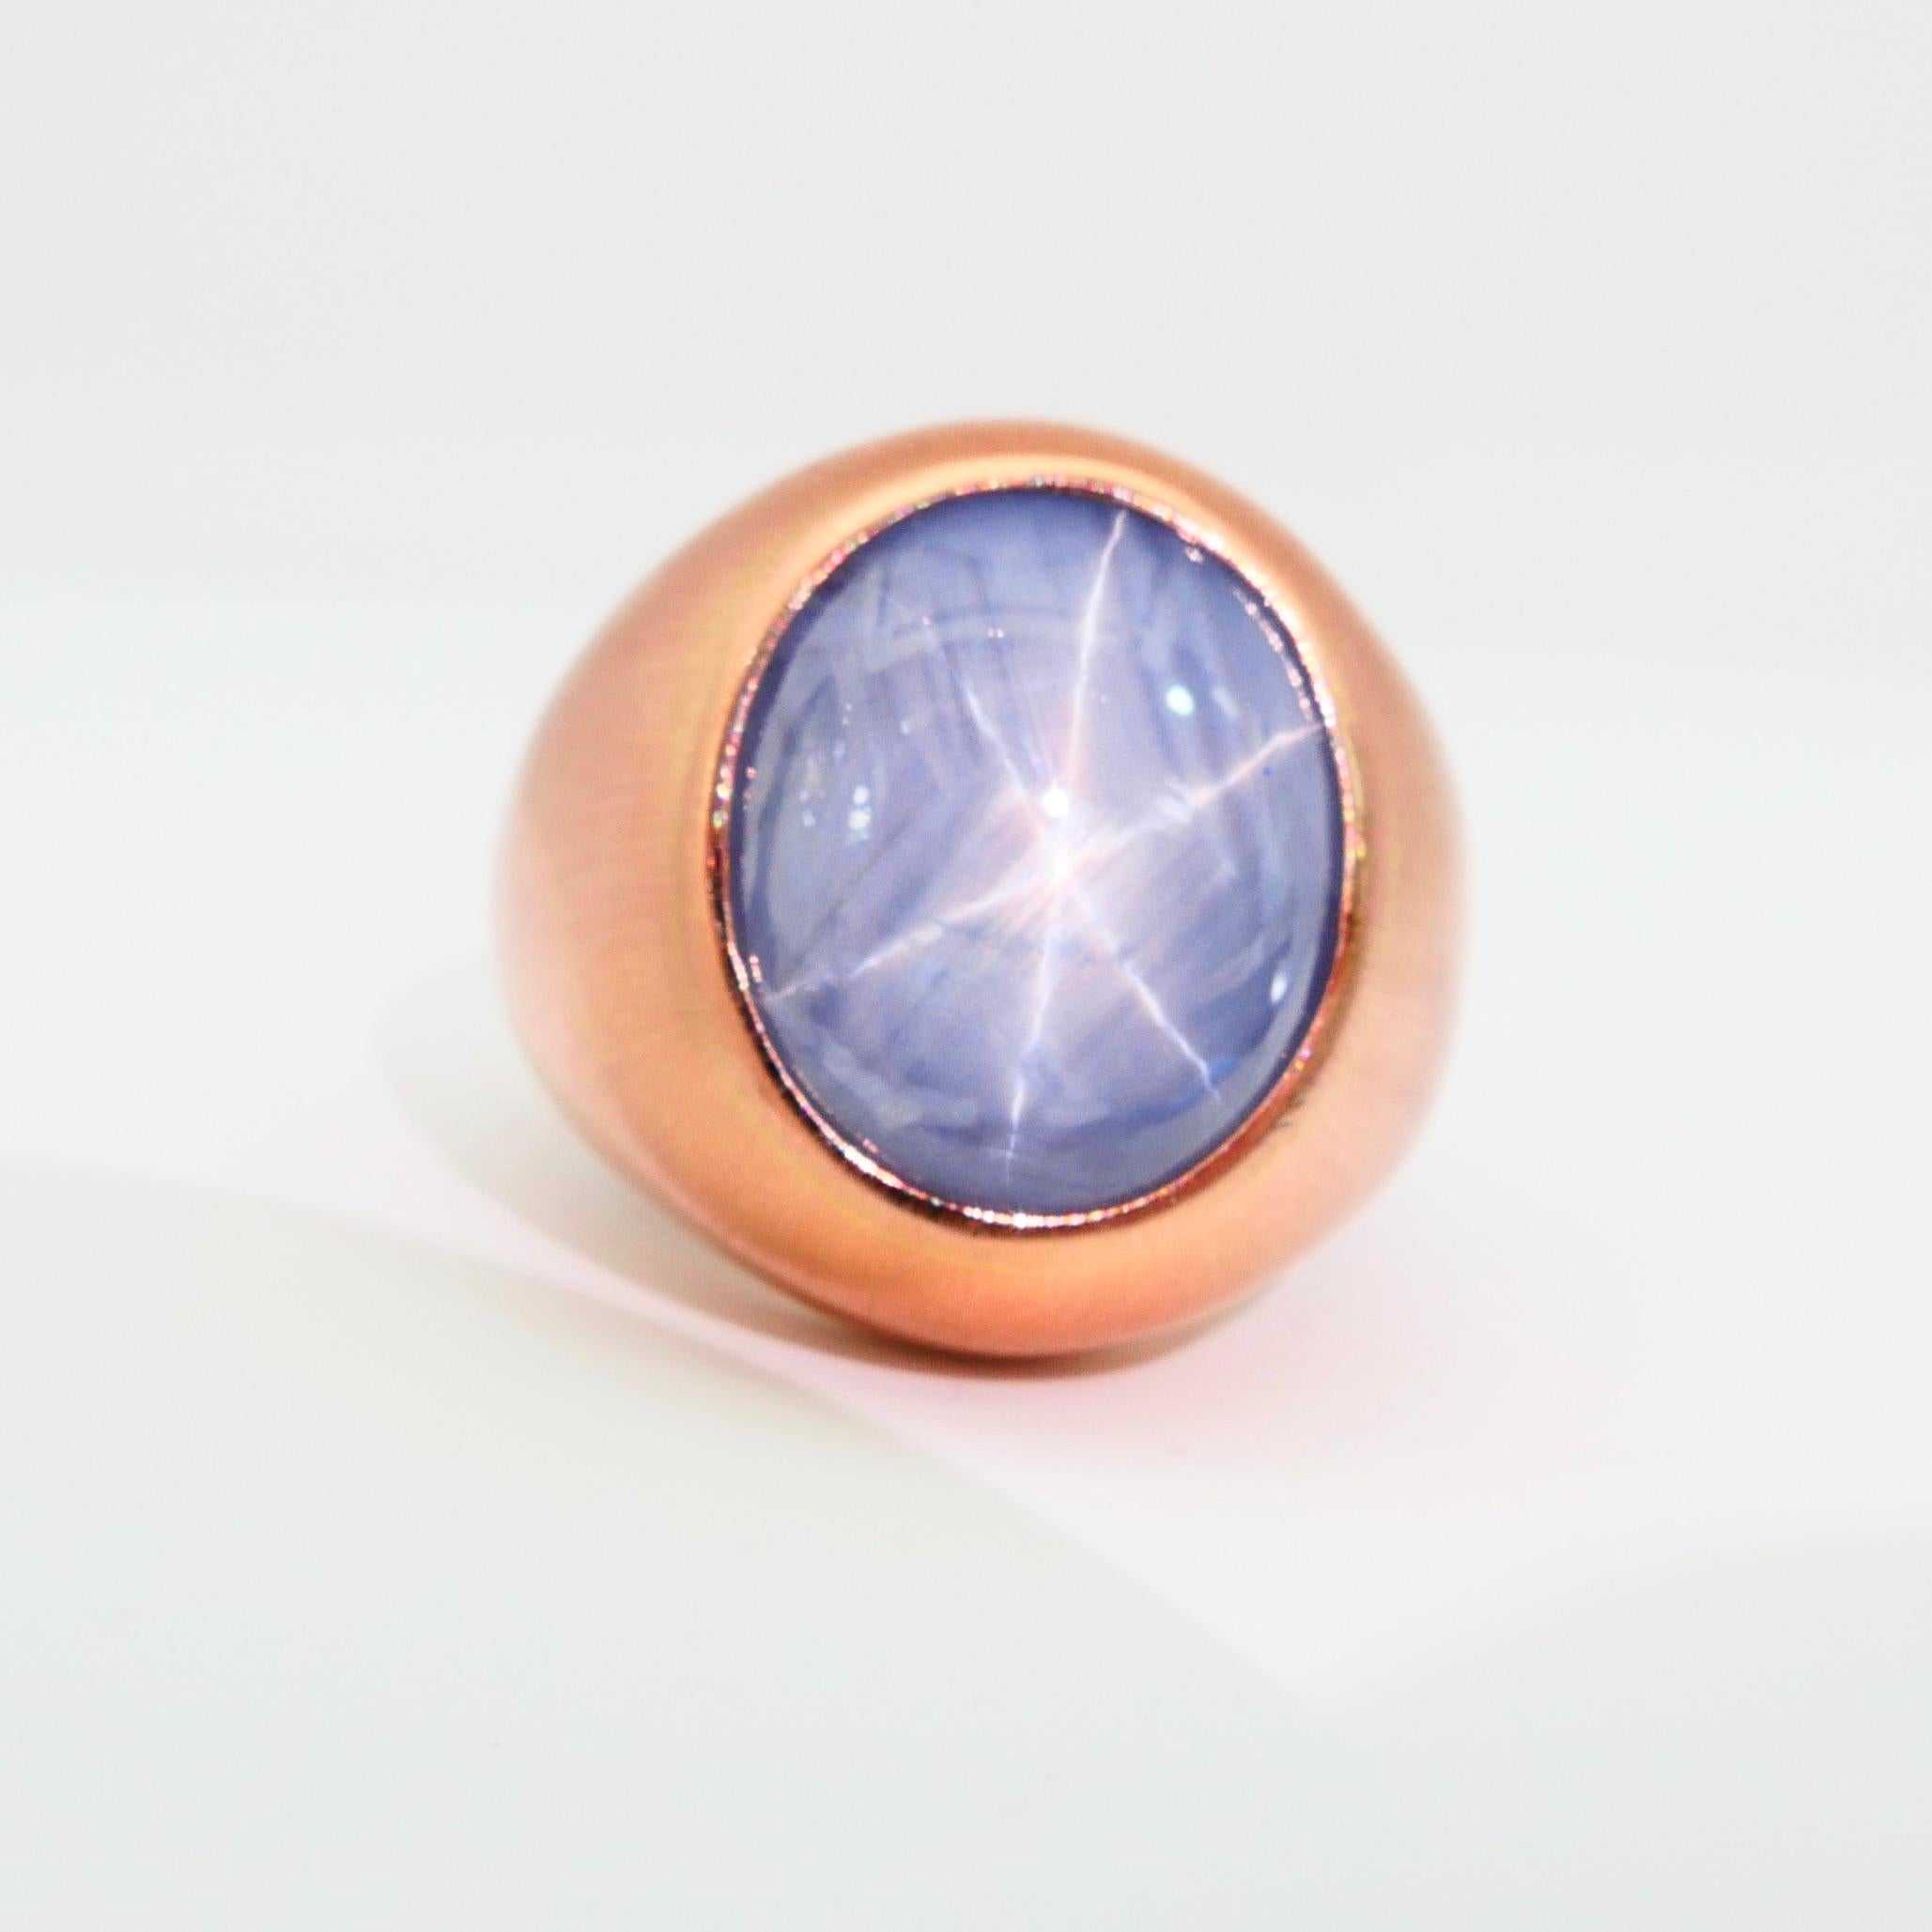 Certified Blue Star Sapphire 39.28 Carat Rose Gold Ring, Unisex, Strong Star 3